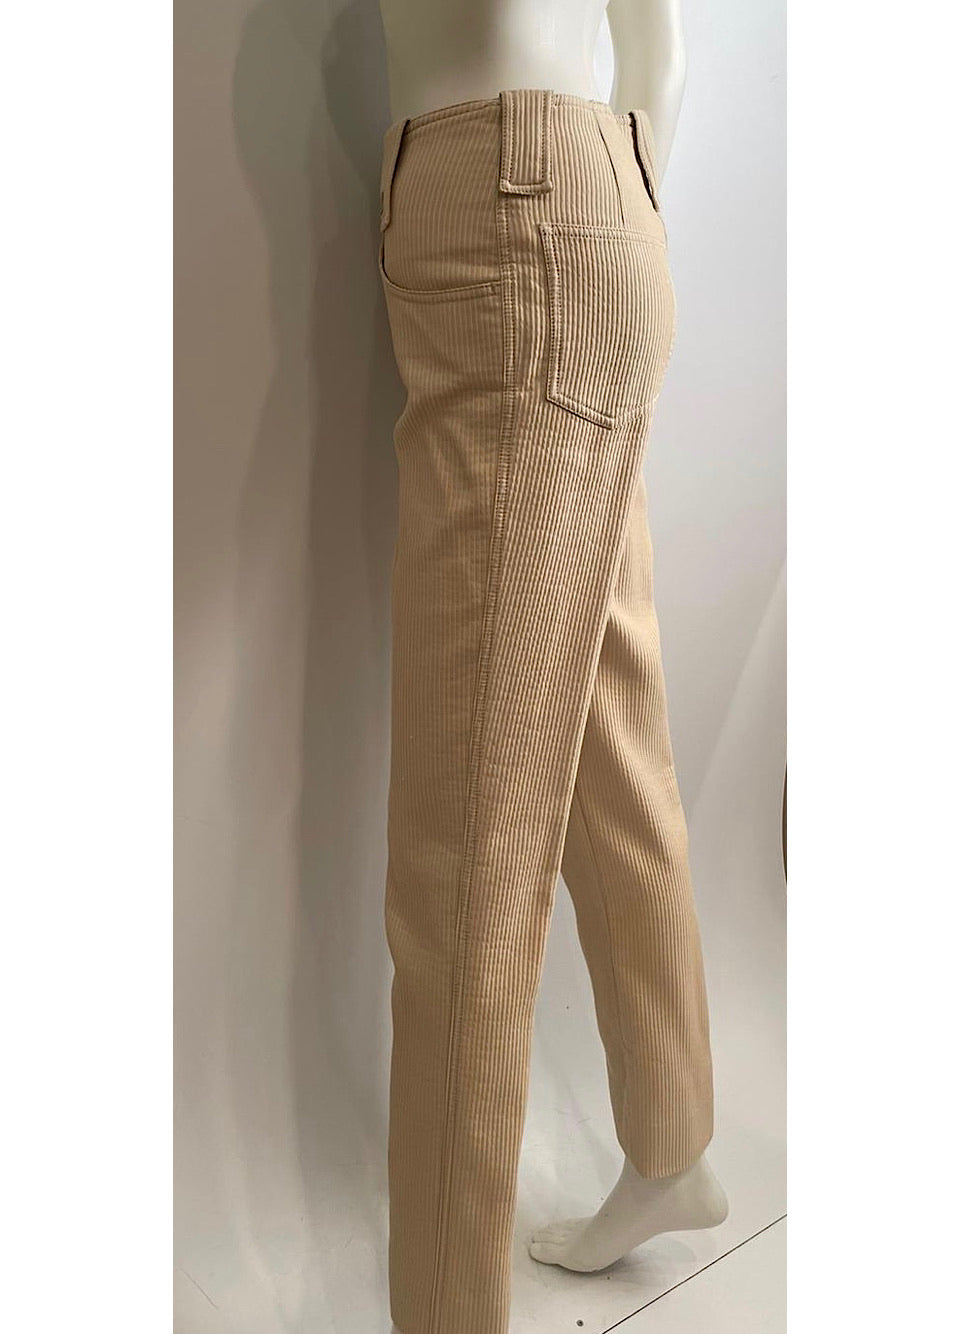 Time & Tru Pants Tan Size M - $10 (50% Off Retail) - From Chanel